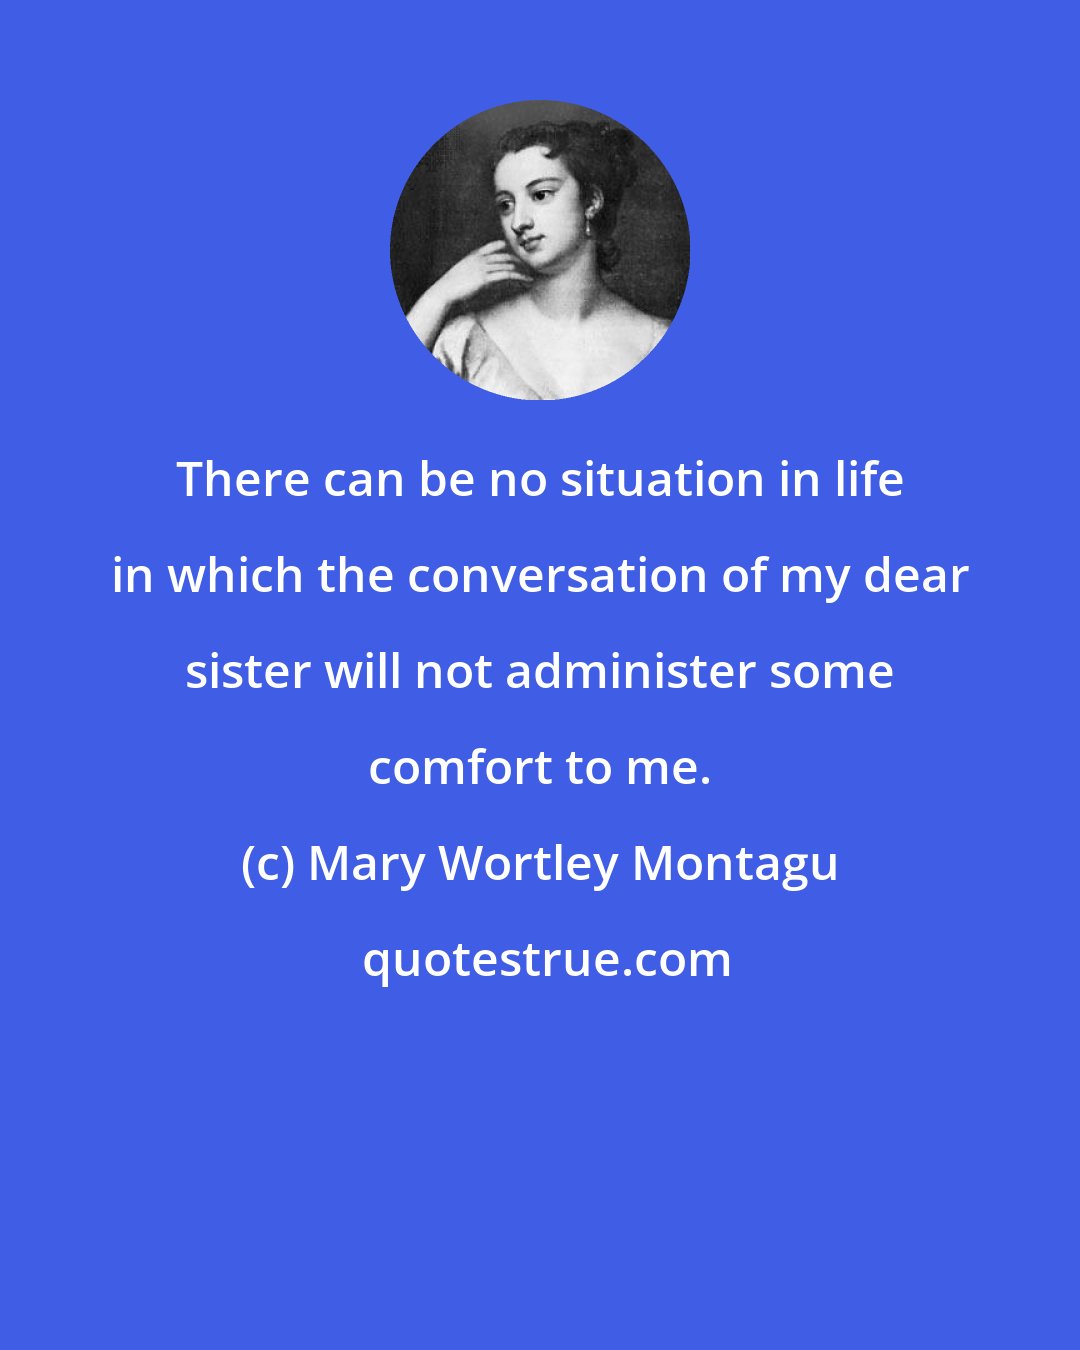 Mary Wortley Montagu: There can be no situation in life in which the conversation of my dear sister will not administer some comfort to me.